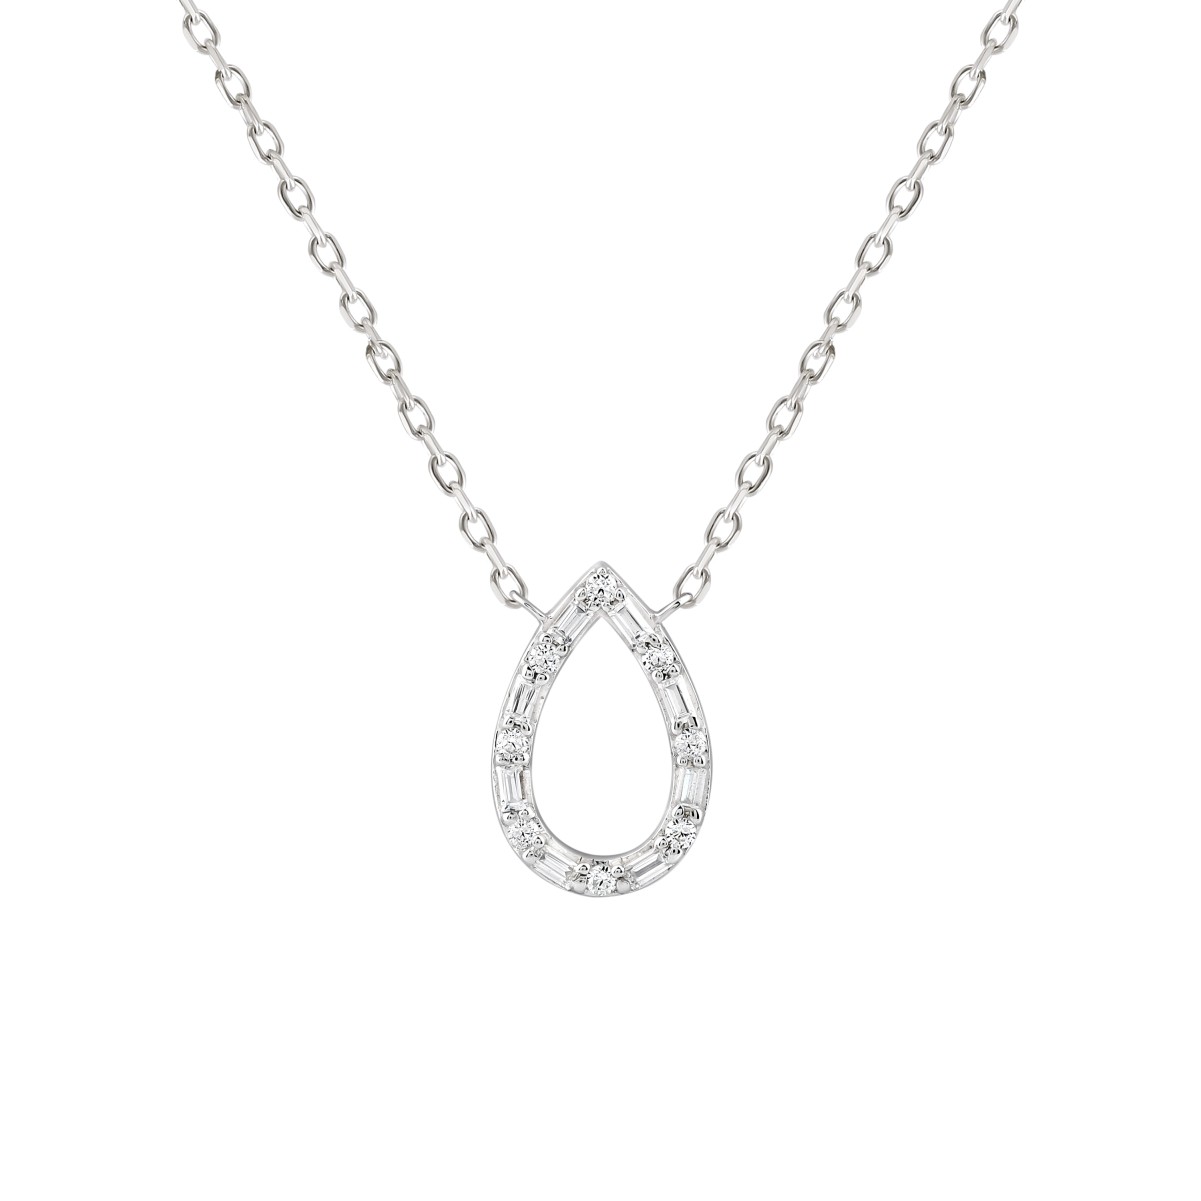 14K WHITE GOLD 1/6CT ROUND/BAGUETTE DIAMOND LADIES PENDANT WITH CHAIN  